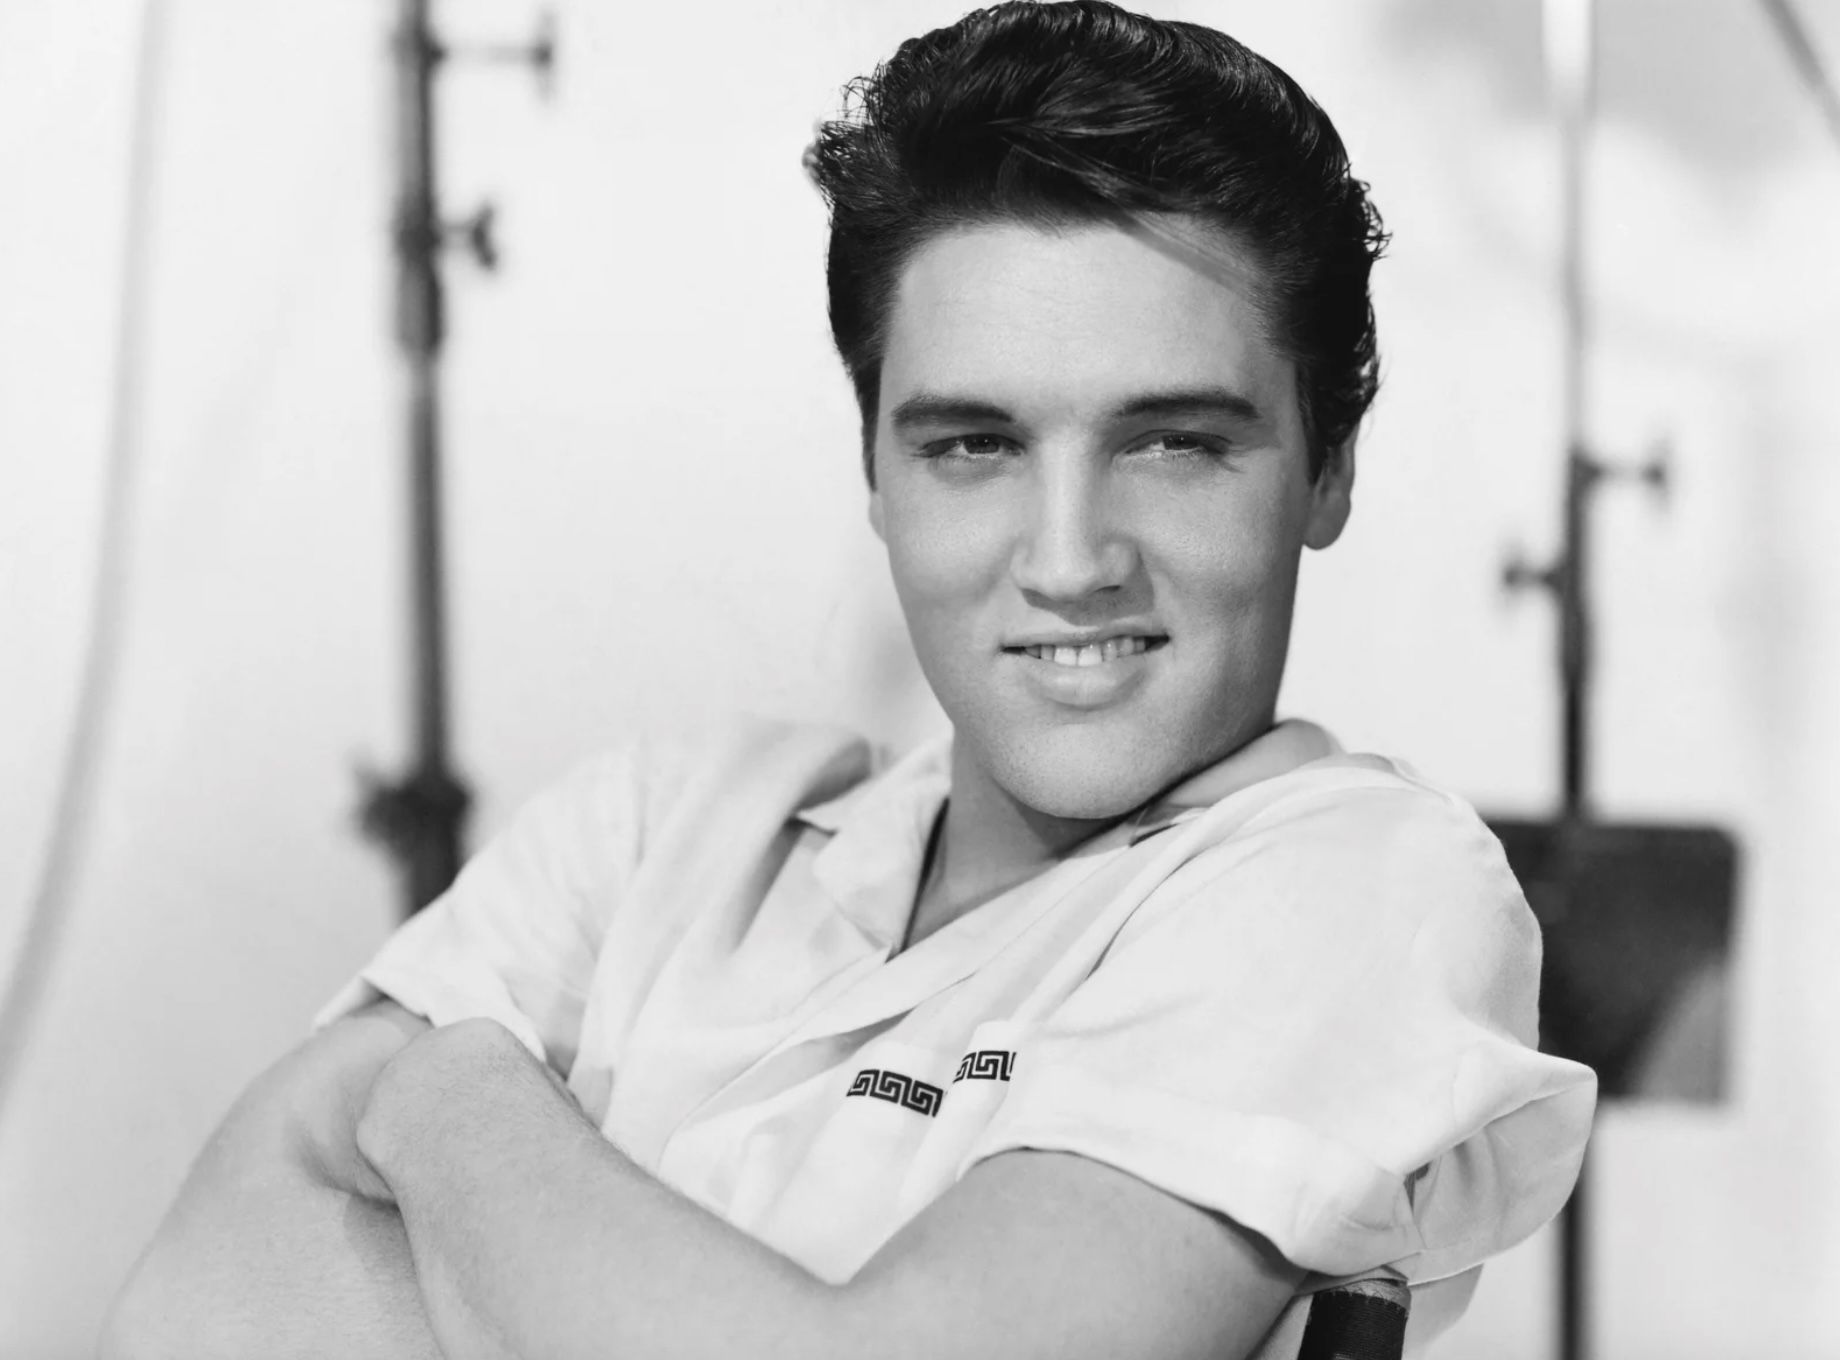 <p>Elvis Presley needs no introduction, so we won't give him one. Instead we're just going to say he's sold over one billion records (with a "B") and leave it at that.</p>